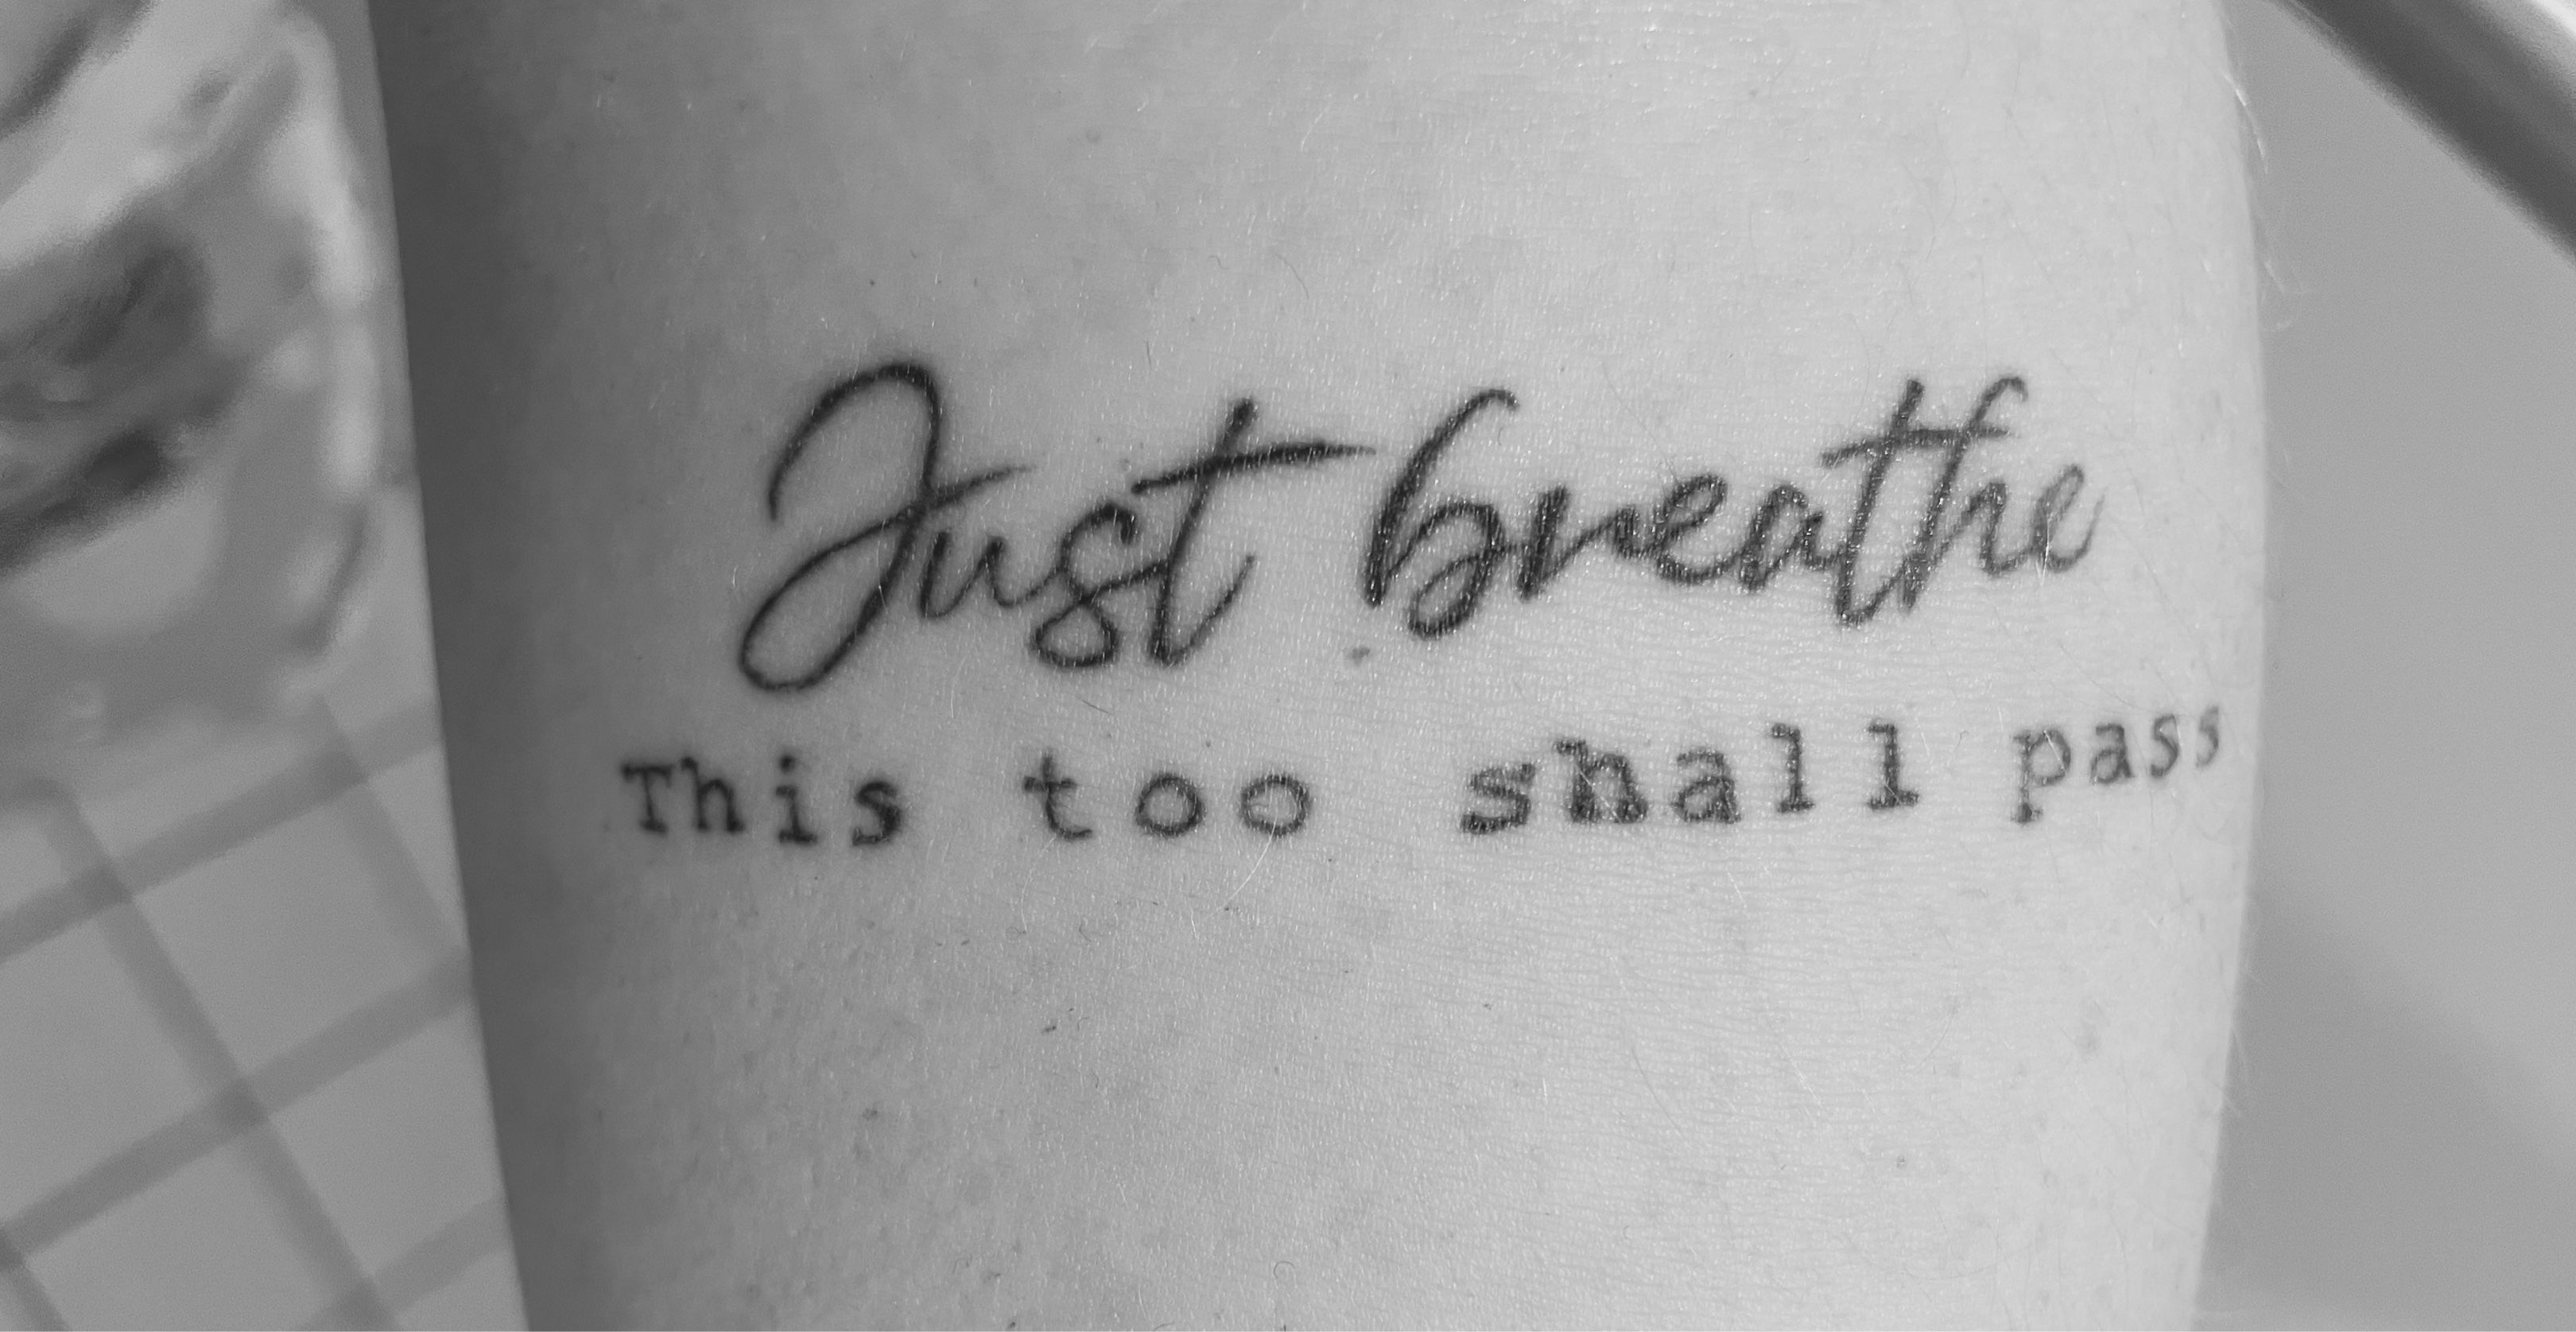 This too shall pass tattoo on the inner forearm